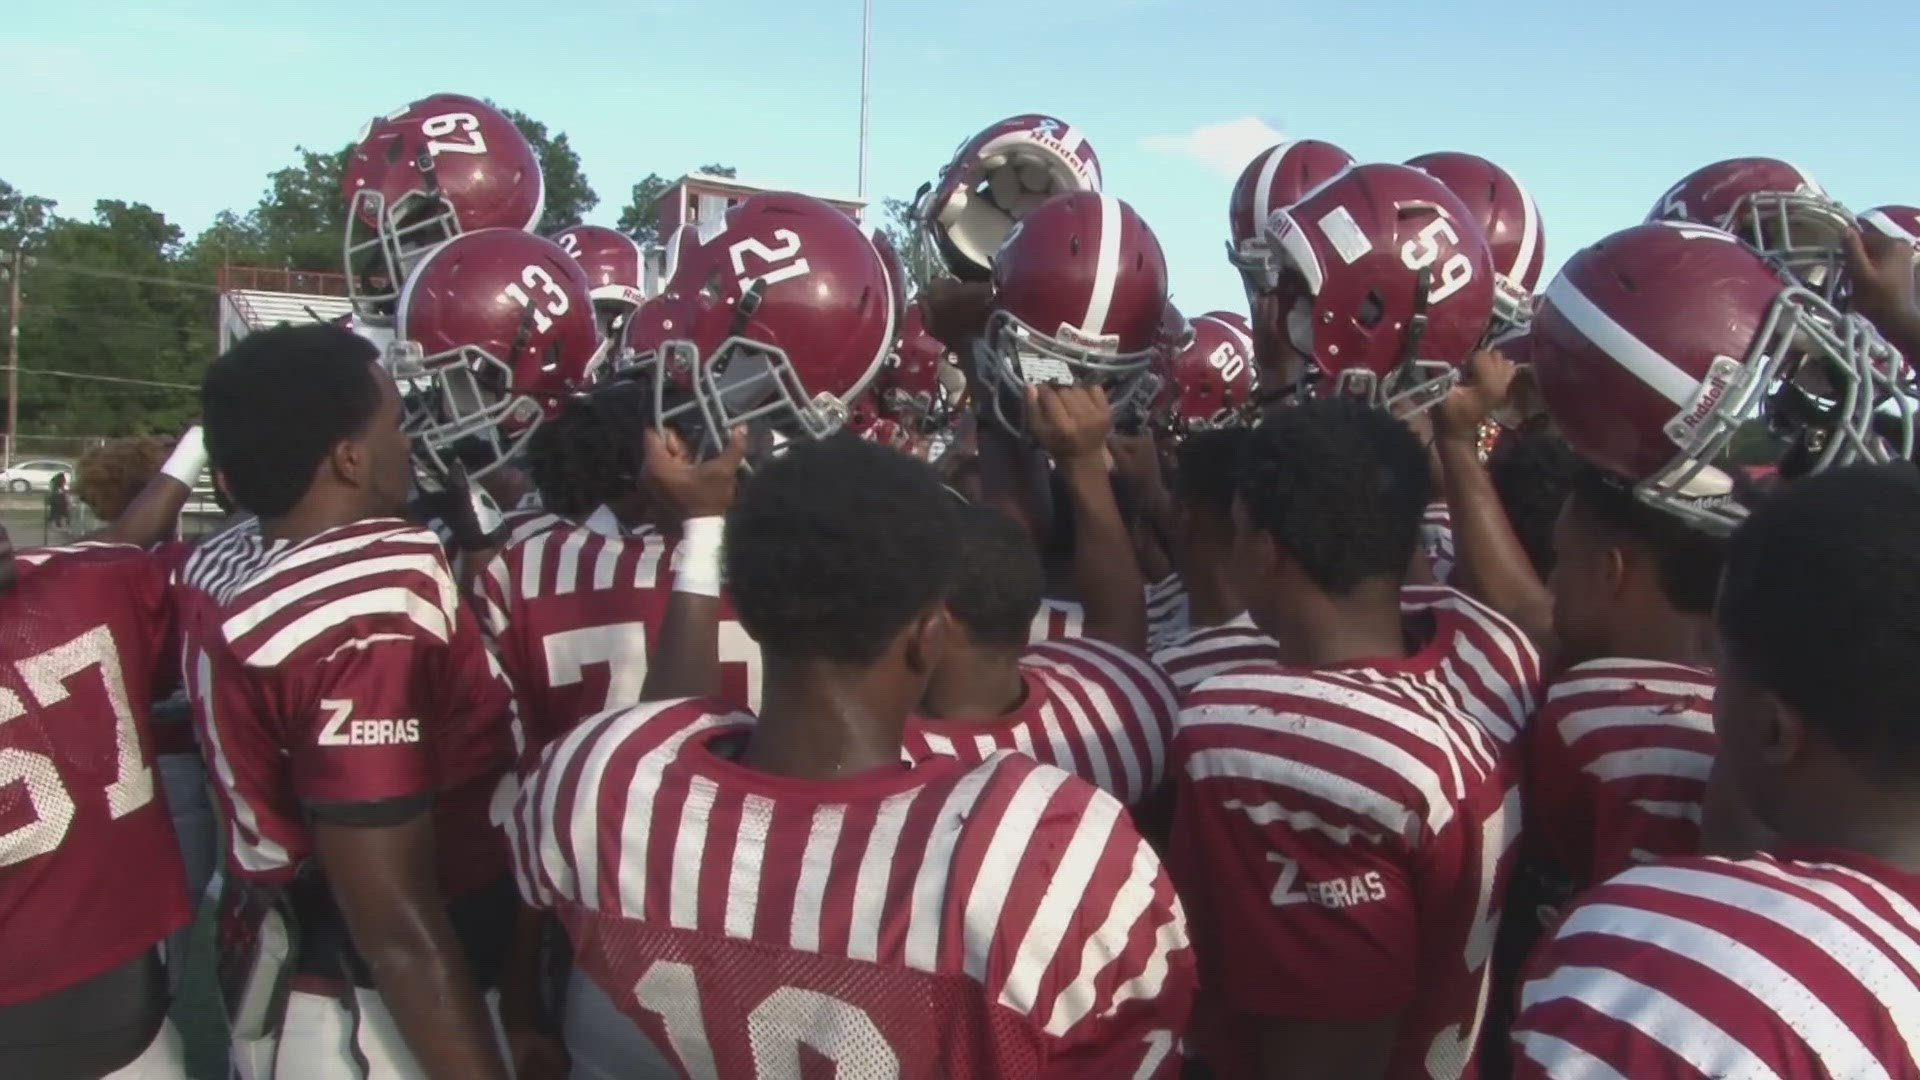 The Zebras are ready to embrace their history as one of the top-tier programs in Arkansas.